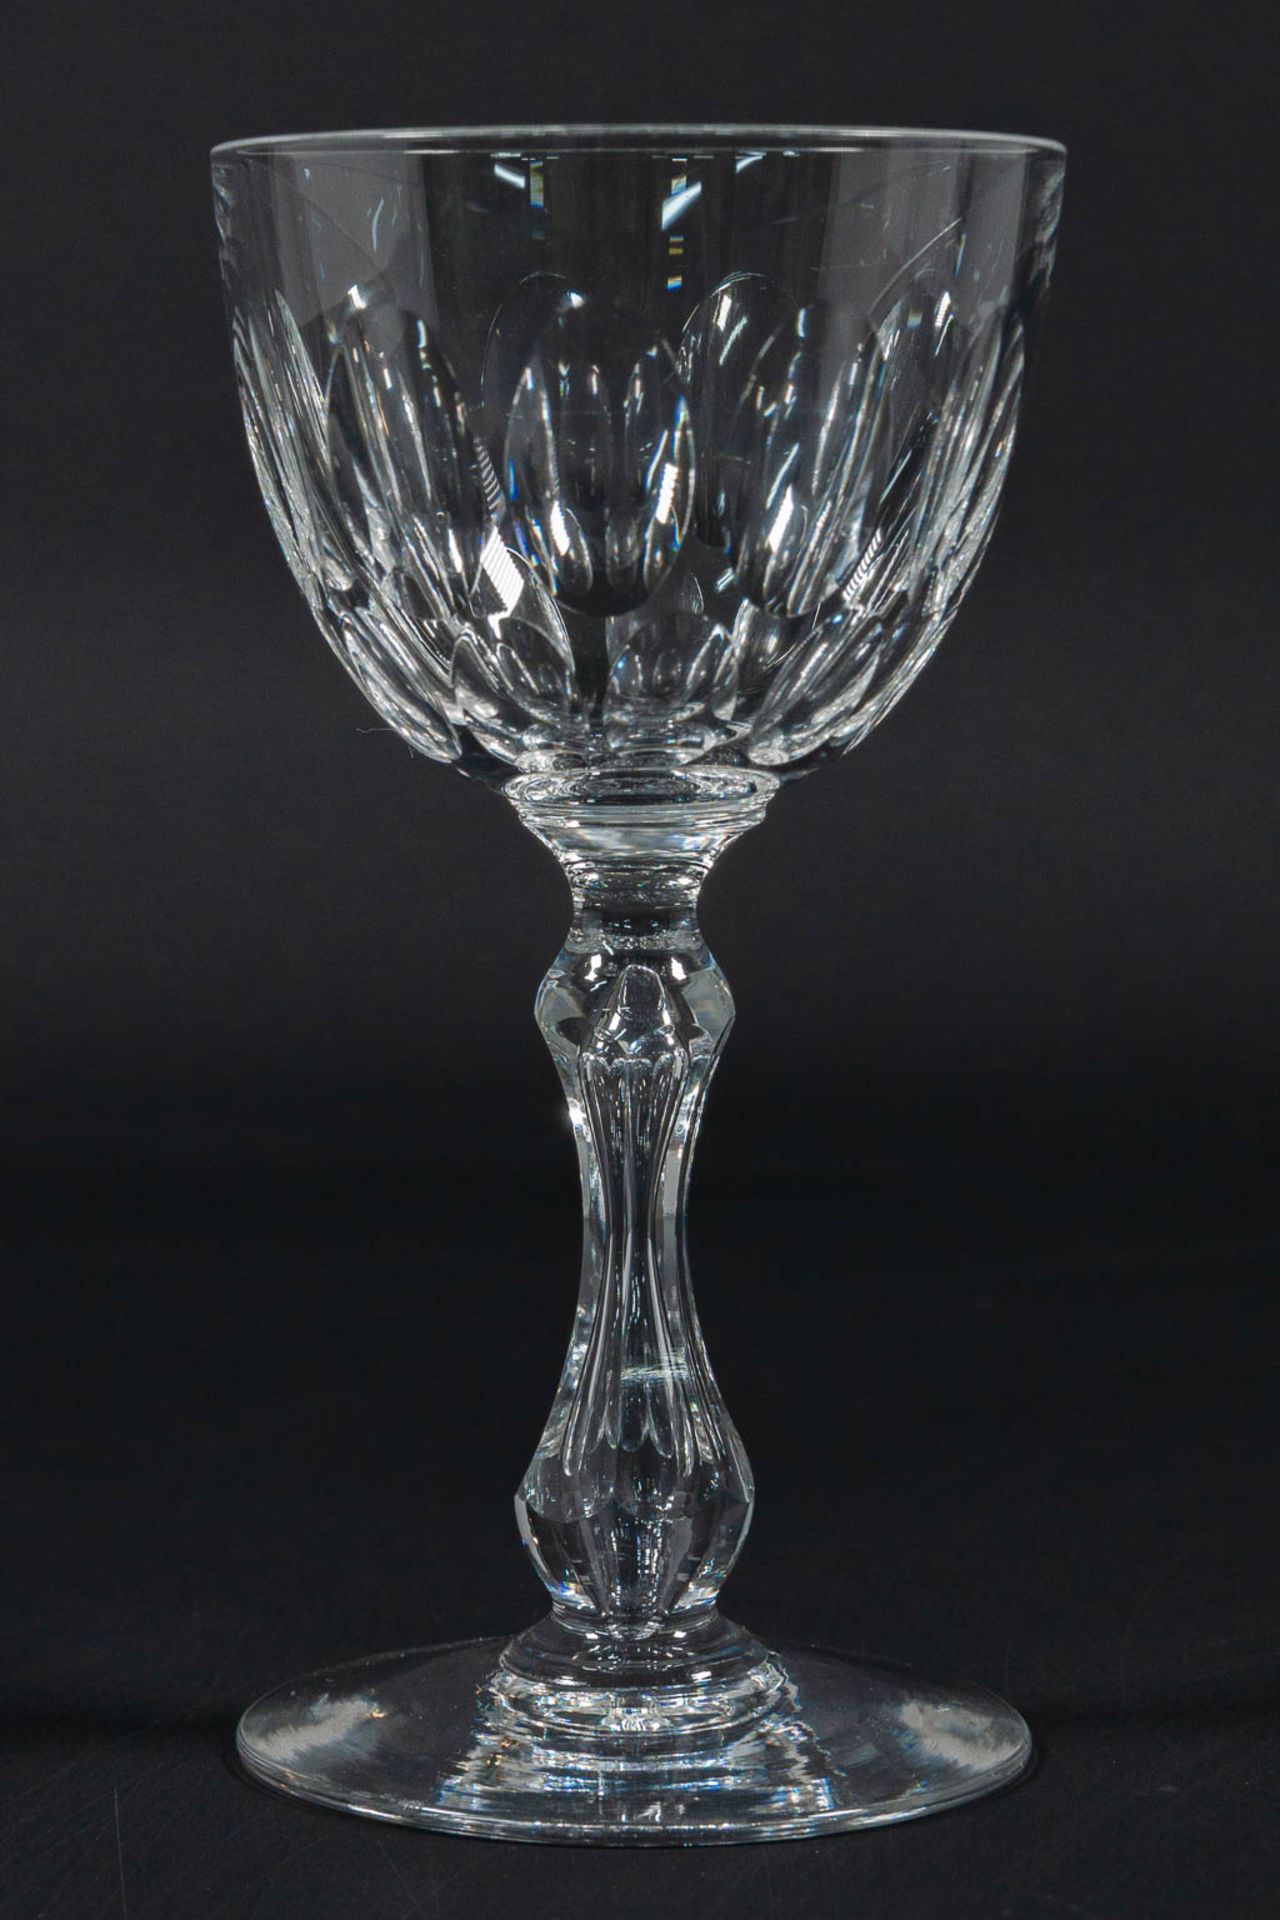 A collection of 34 antique cyrstal glasses with cut sides. - Image 2 of 6